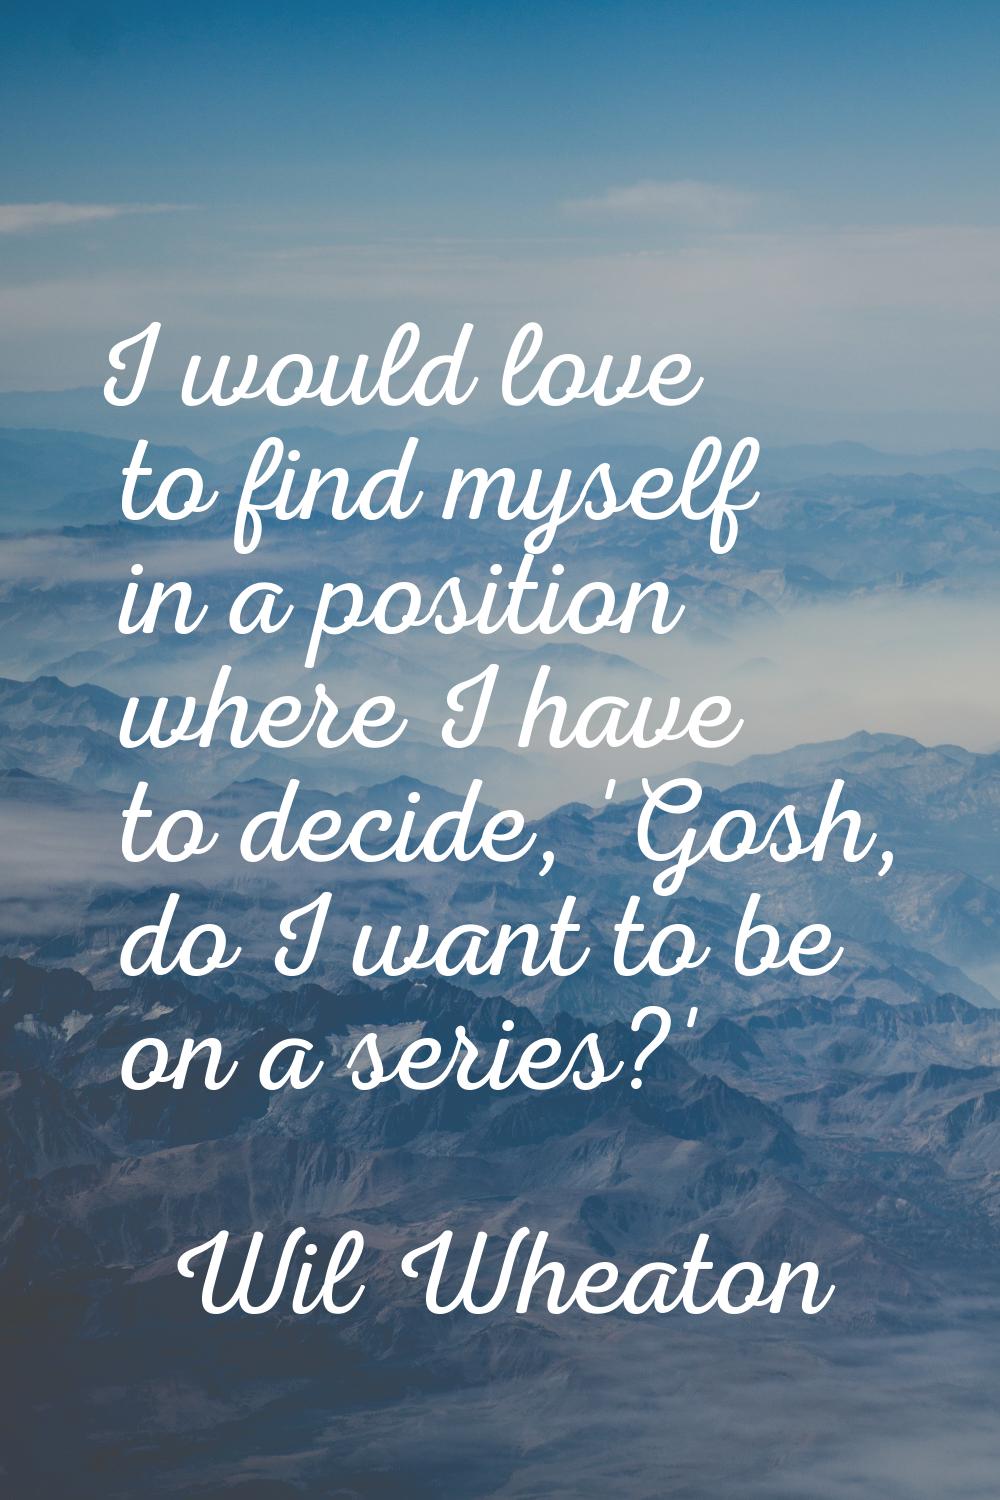 I would love to find myself in a position where I have to decide, 'Gosh, do I want to be on a serie